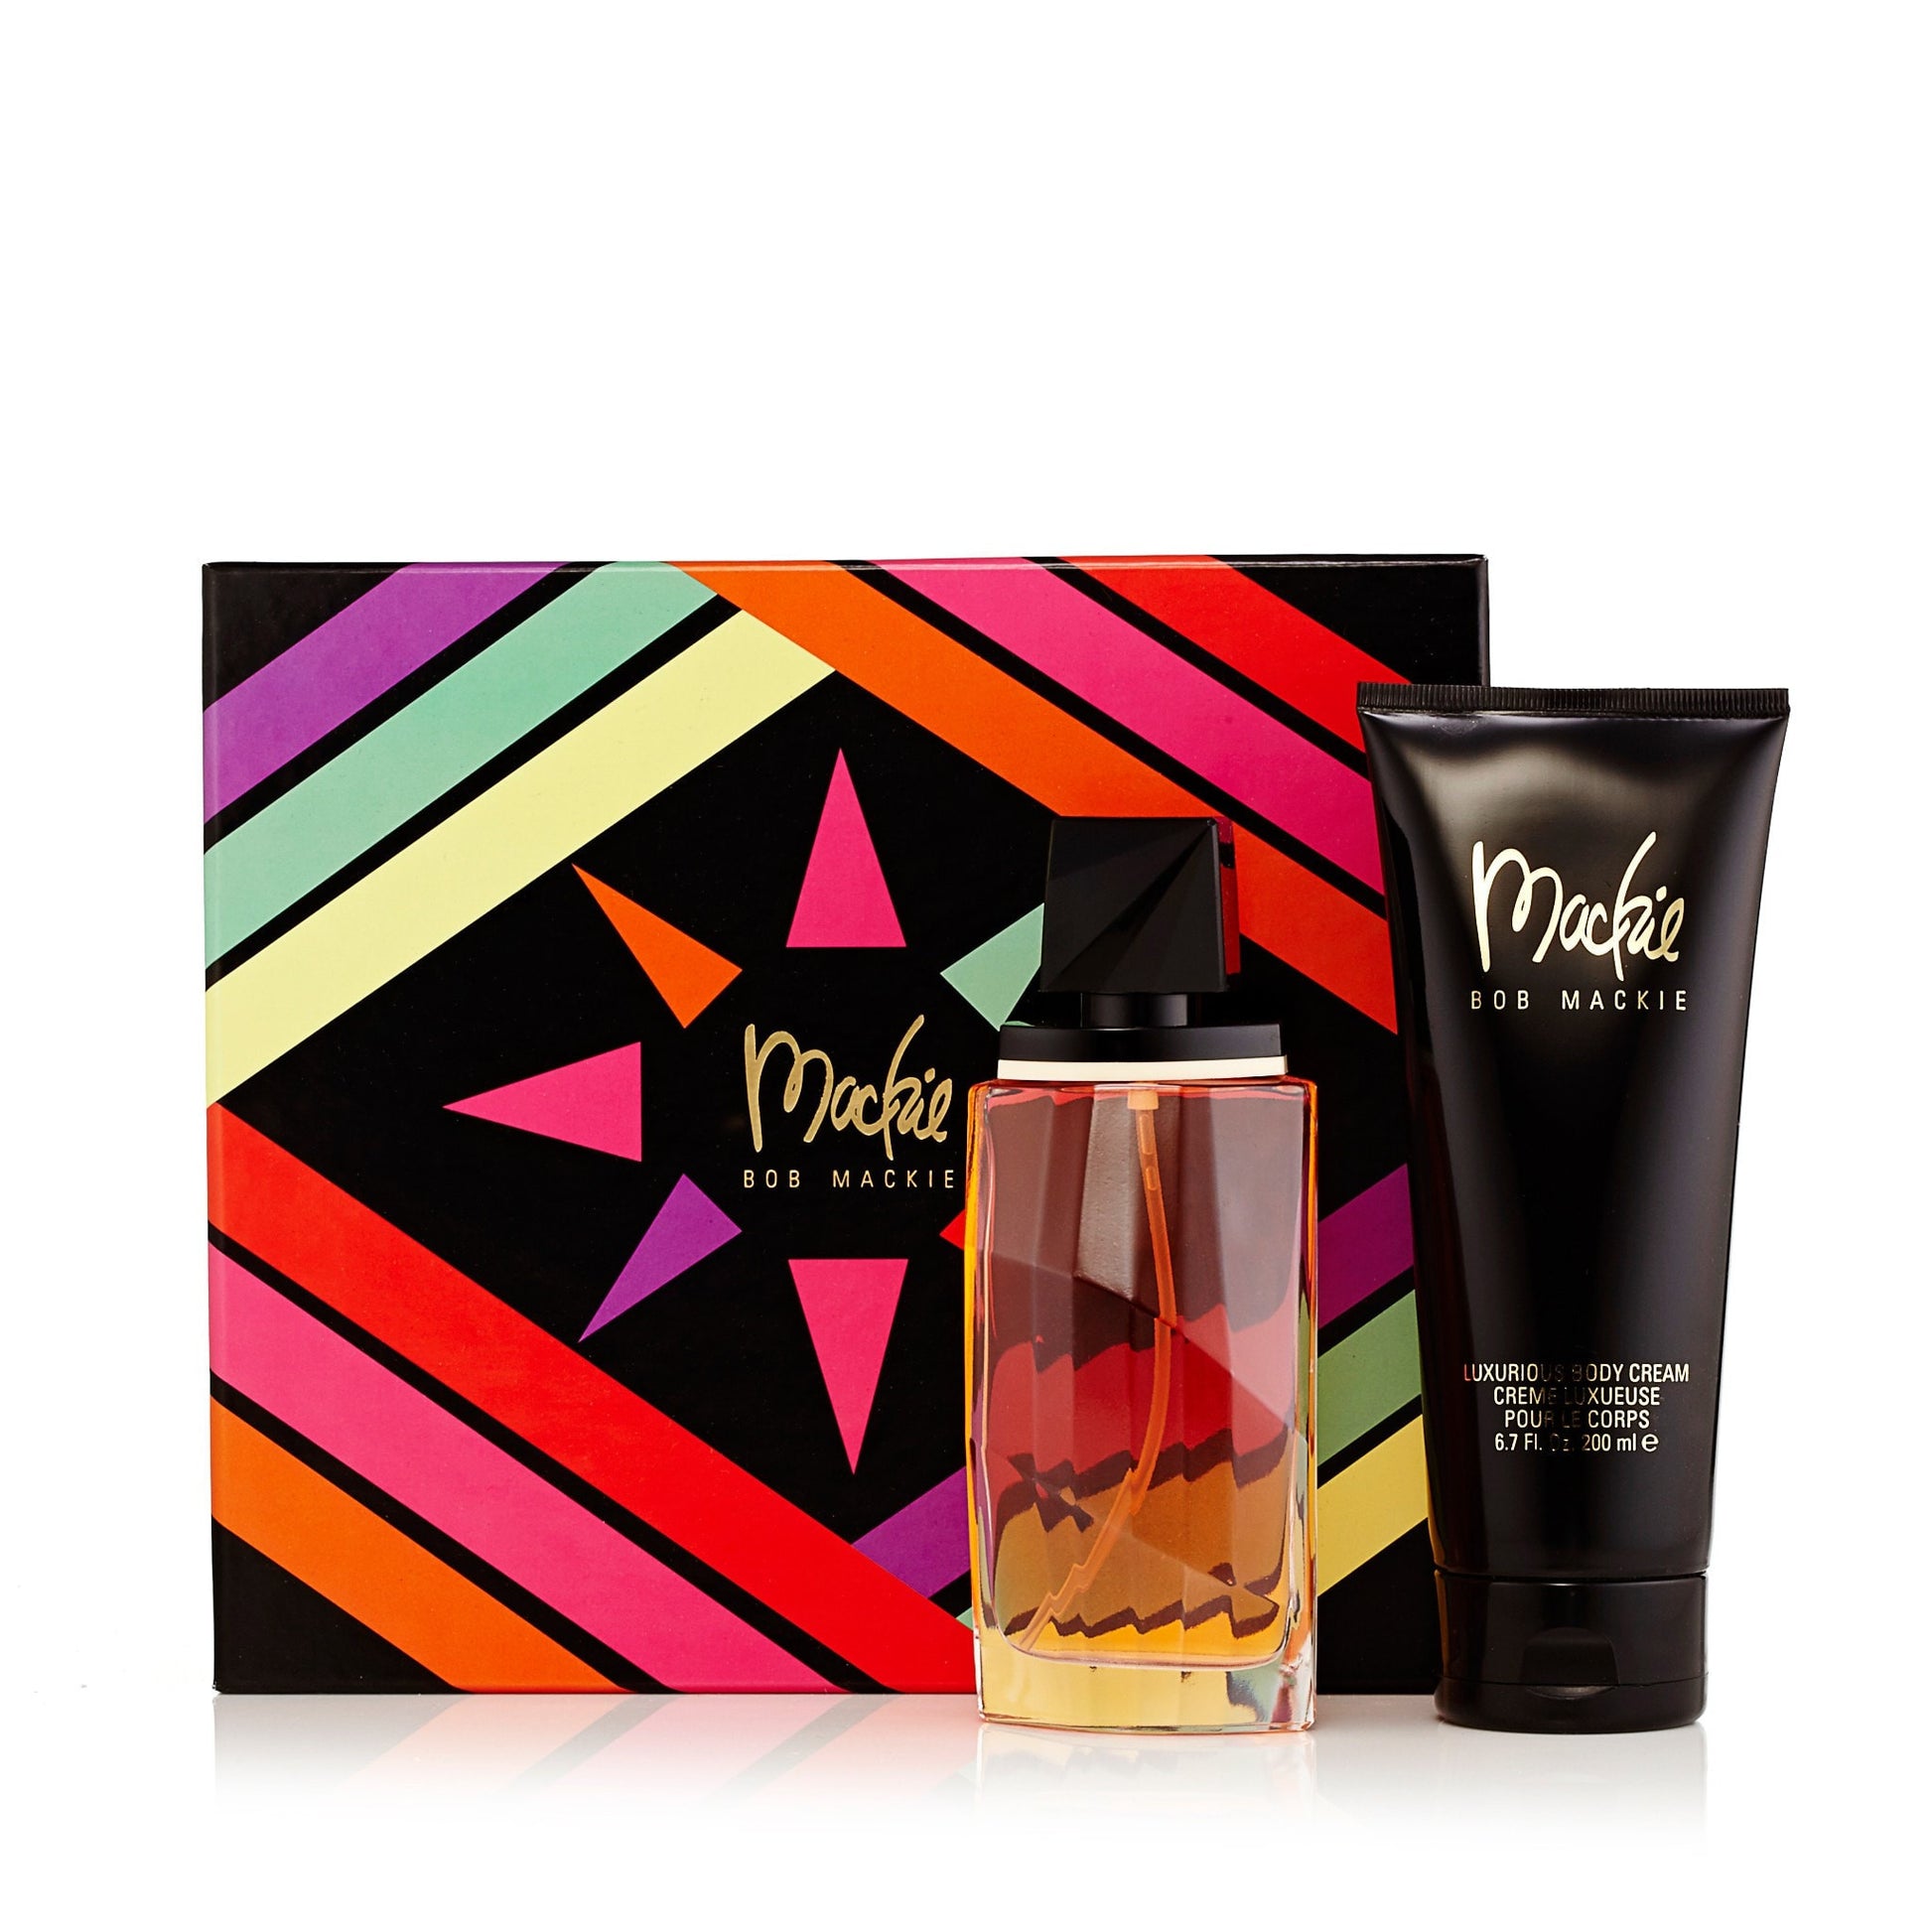 Mackie Gift Set for Women by Bob Mackie 3.4 oz. Click to open in modal